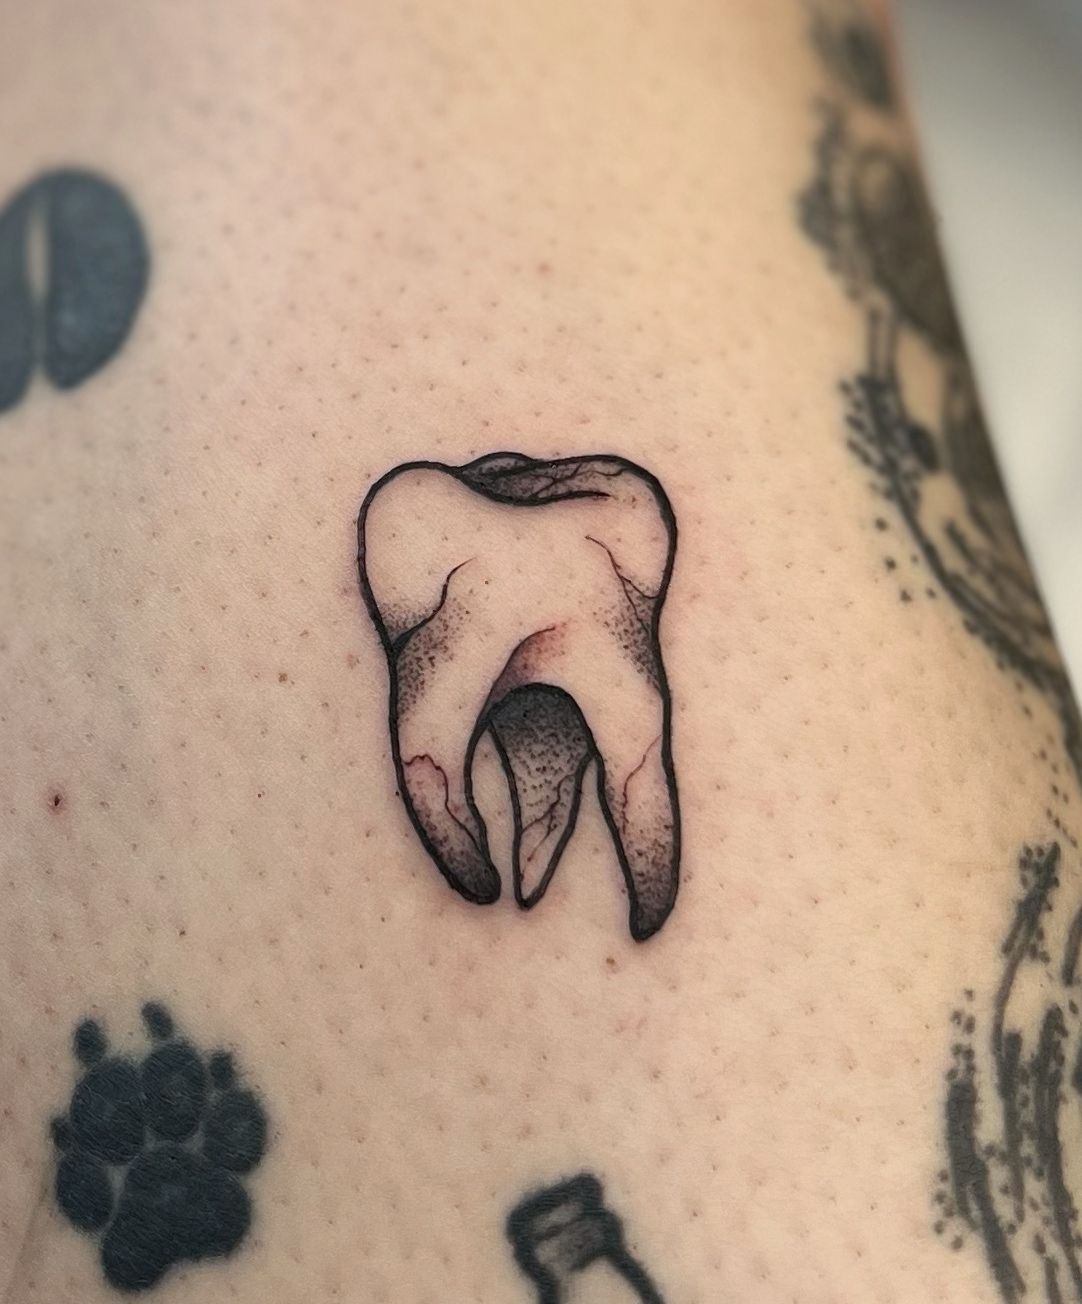 Micro-realistic tooth tattoo on the inner arm